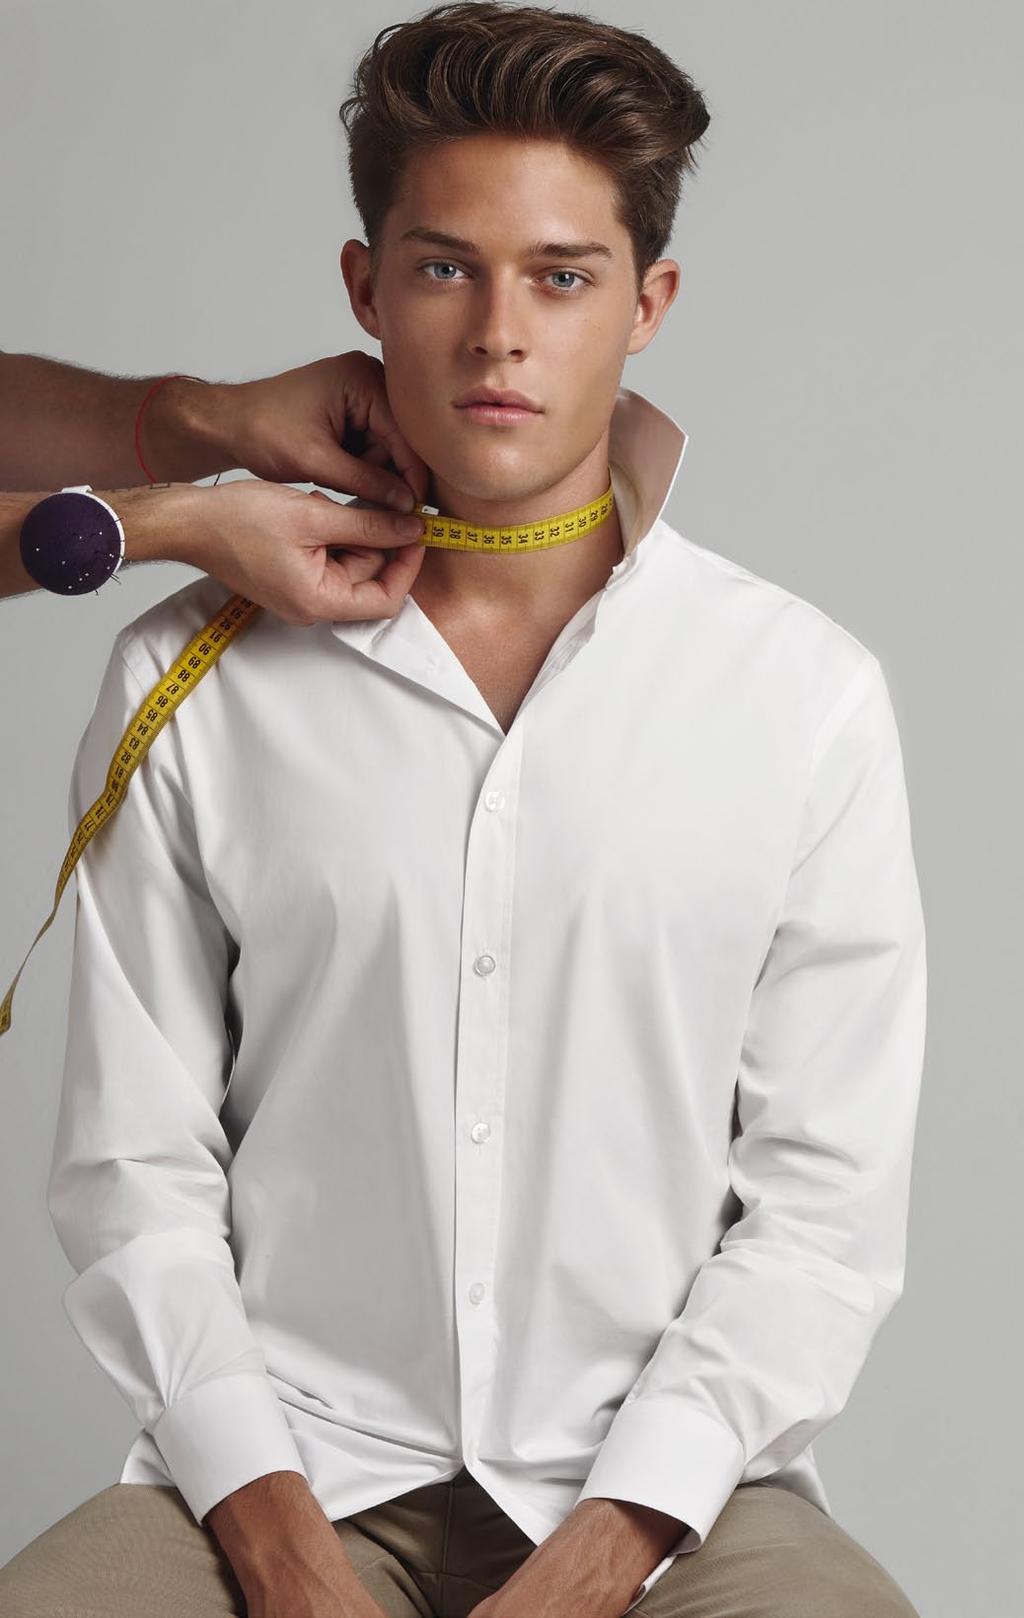 the codes There are several signs of a quality dress shirt. Some, like fabric, fit, collars or cuffs, are instantly obvious. Others, like buttons or stitching, take a minute to appreciate.